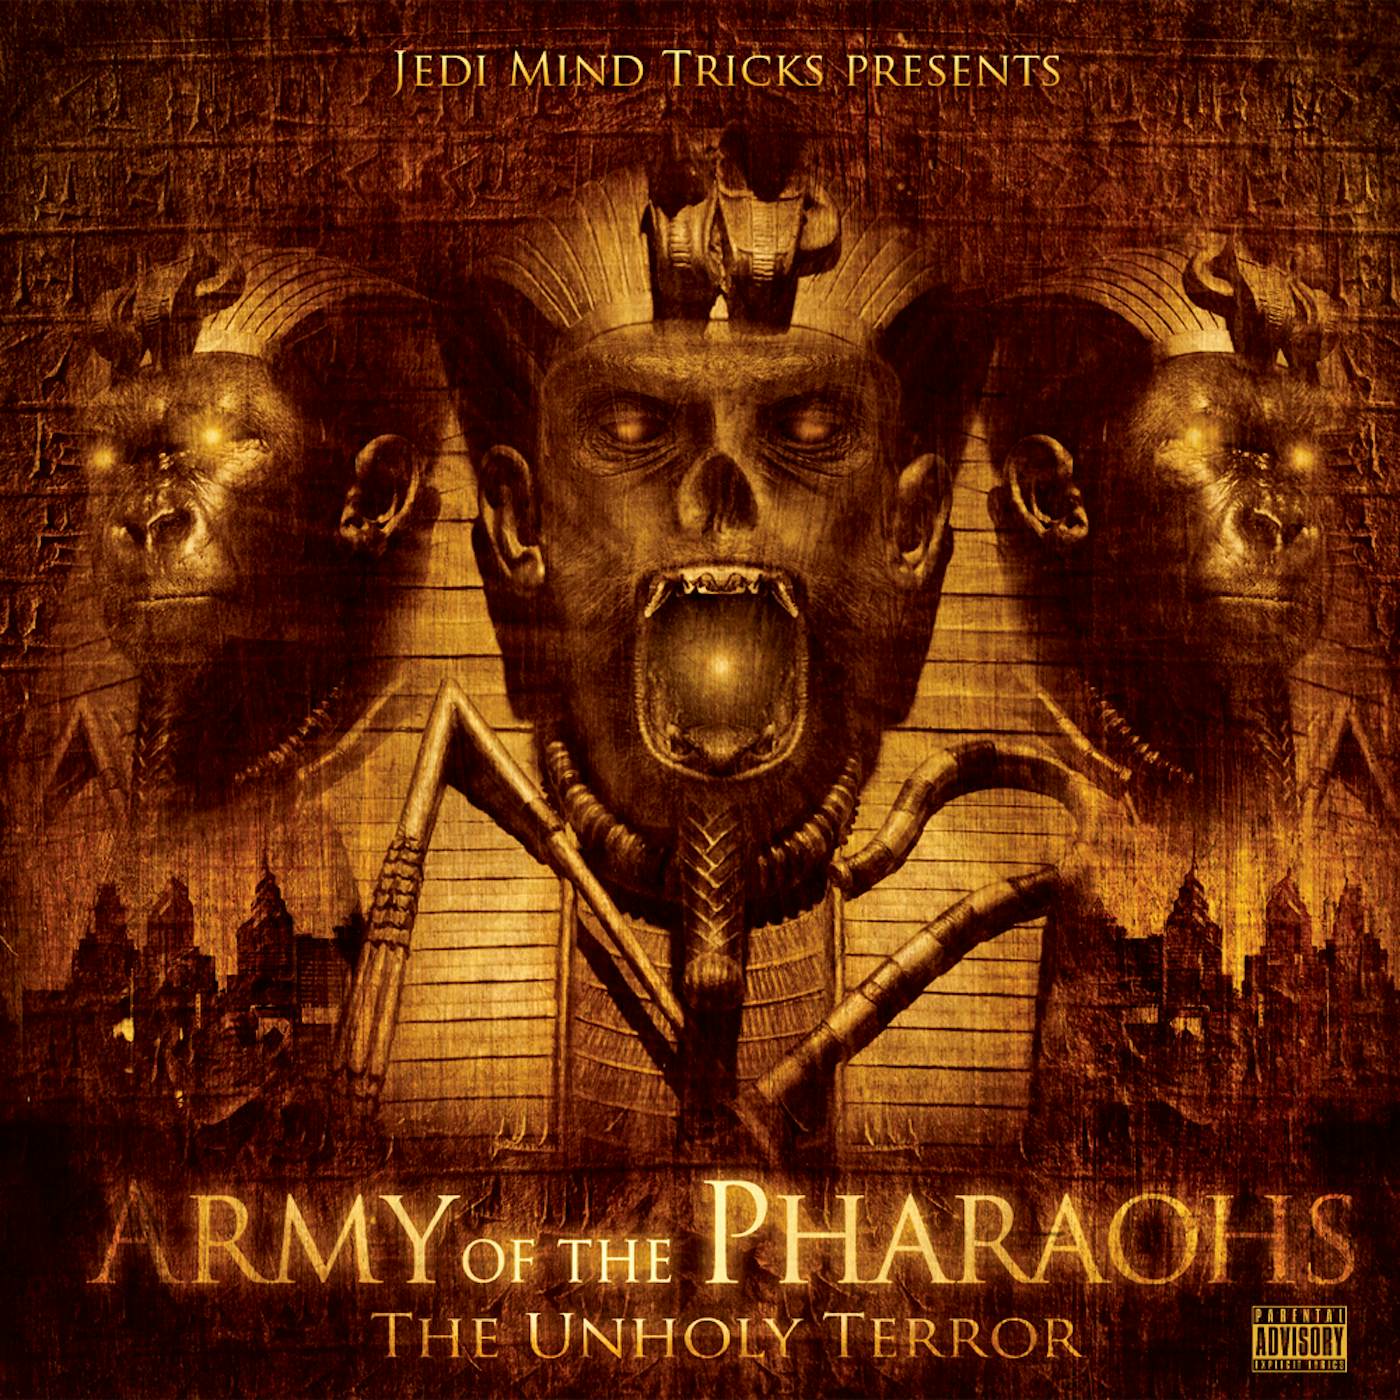 Jedi Mind Tricks ARMY OF THE PHARAOHS: THE UNHOLY TERROR CD